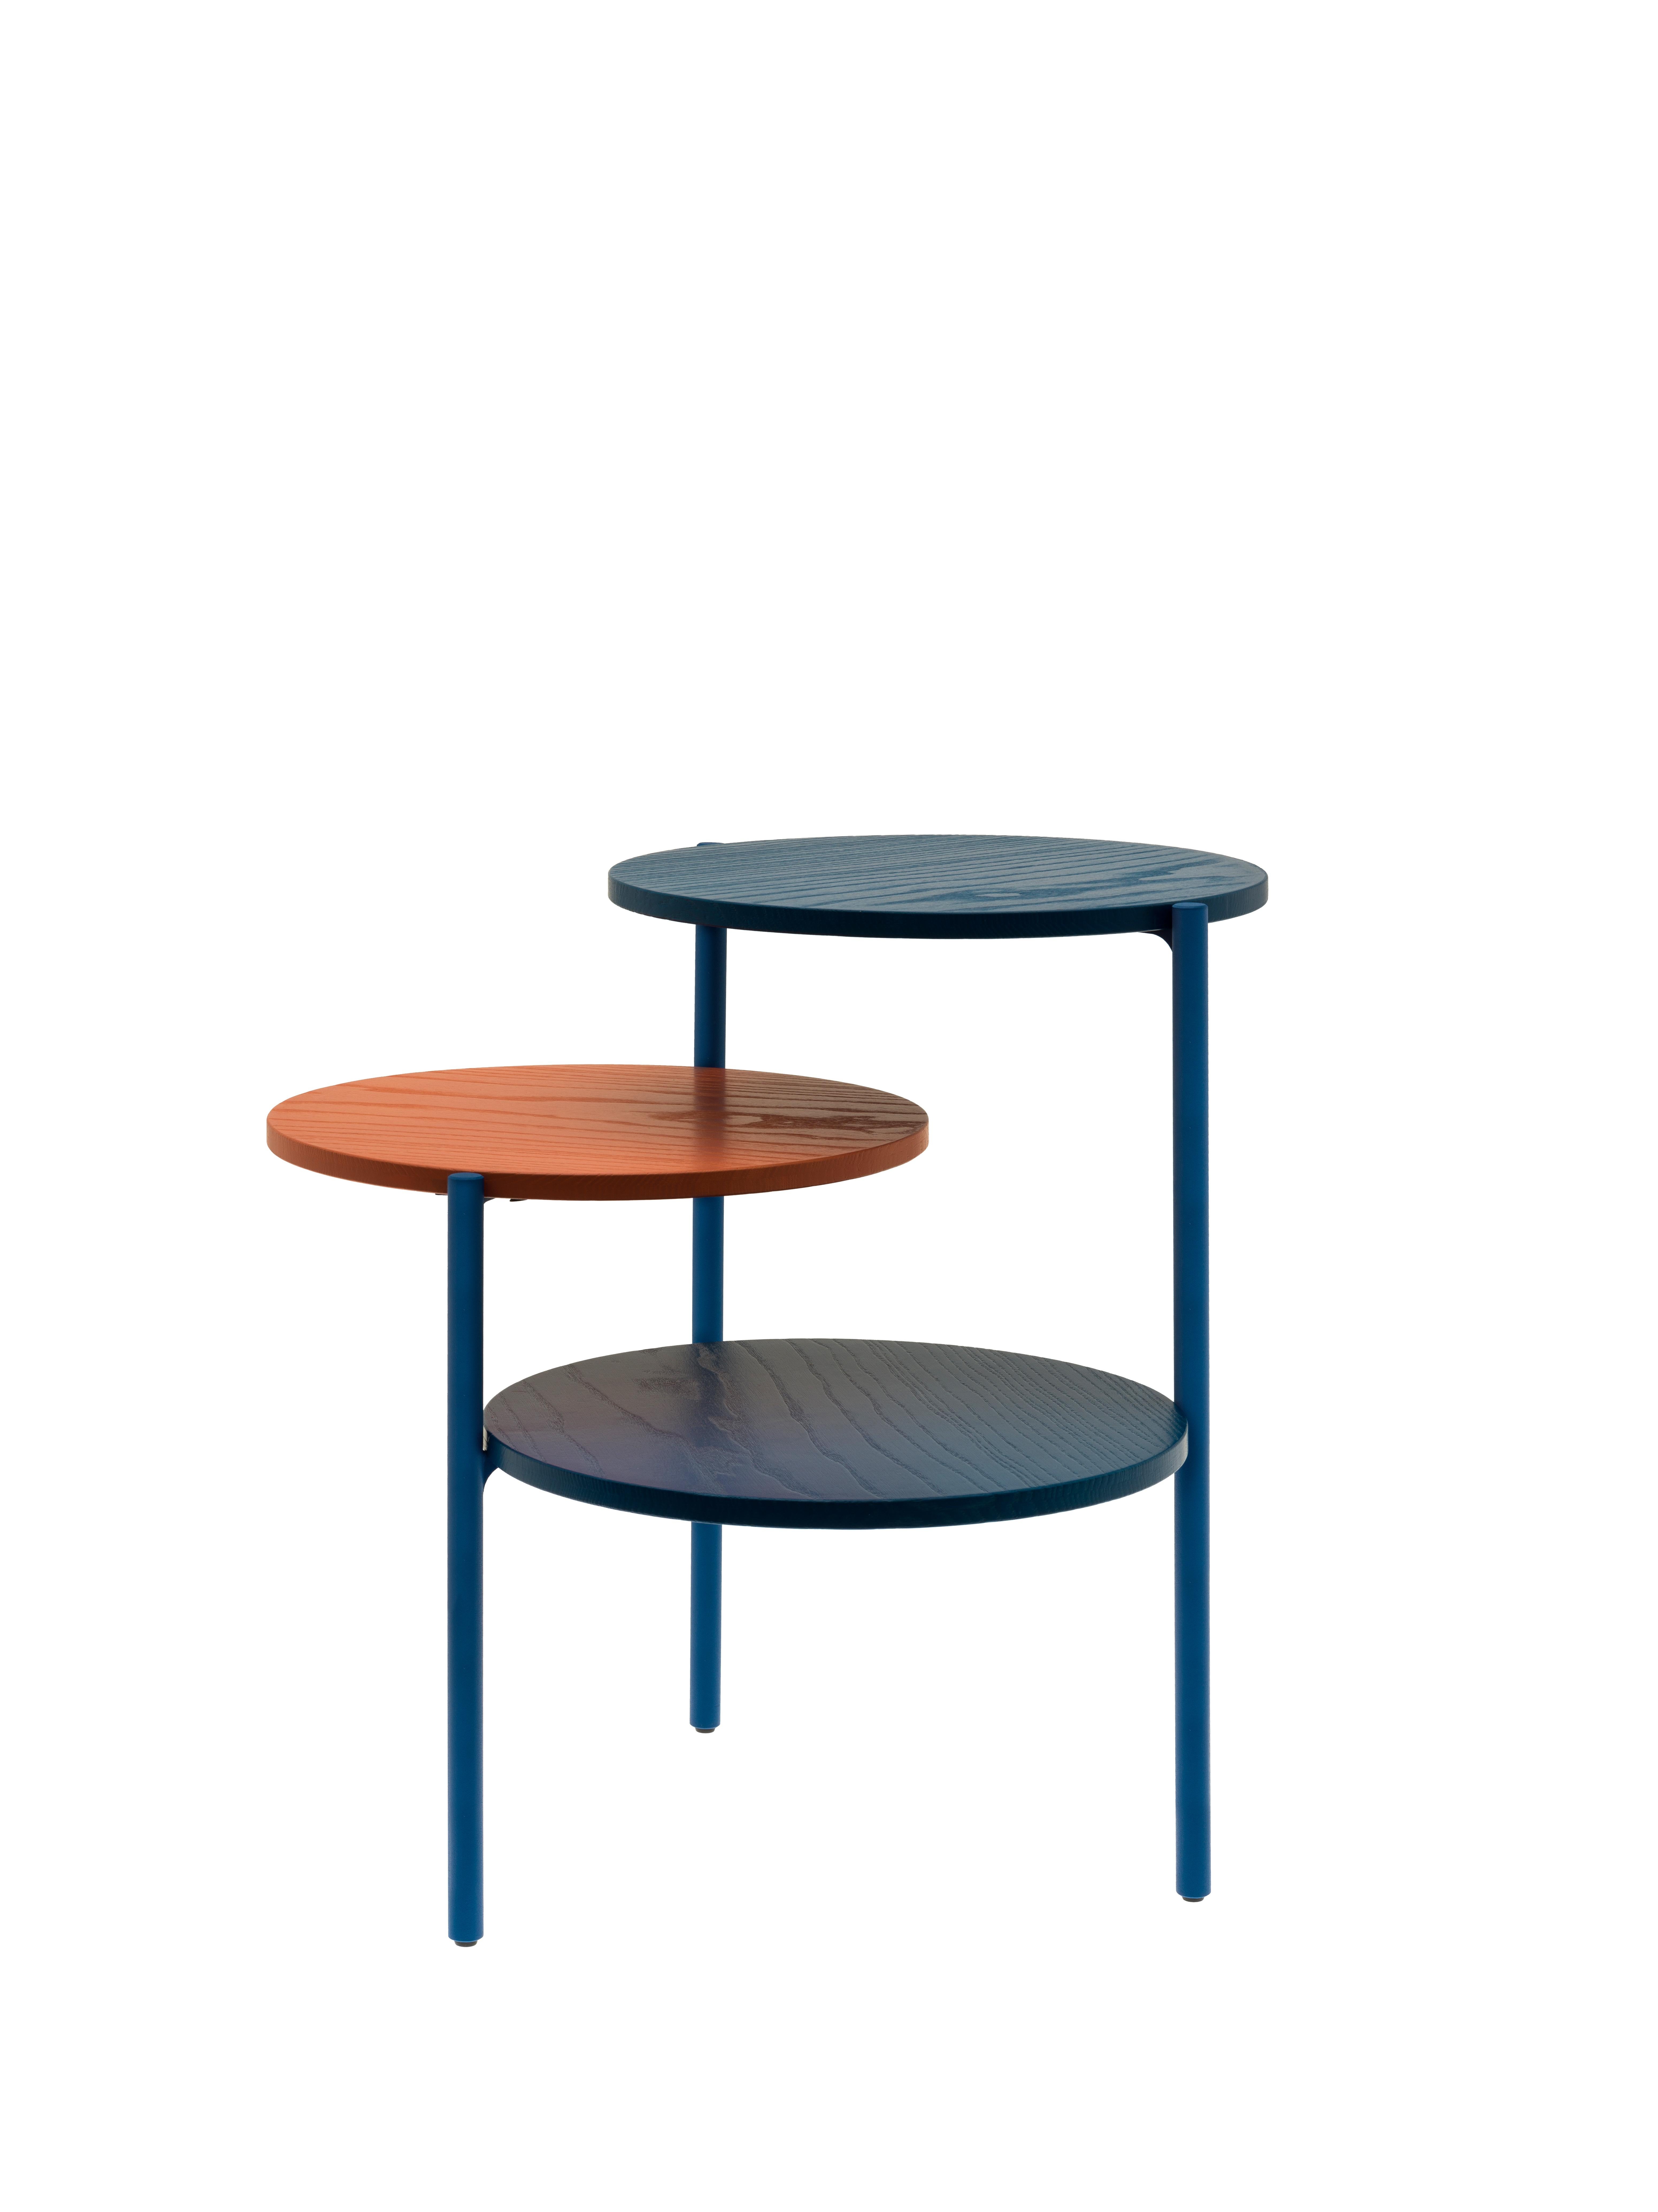 Pair of blue & coral triplo tables by Mason Editions
Dimensions: 54 × 54 × 52.5 cm
Materials: iron, ash
Colours: total black, total blue, total light grey, blue + coral, black + light grey, light grey + pumpkin

This side table is based on the